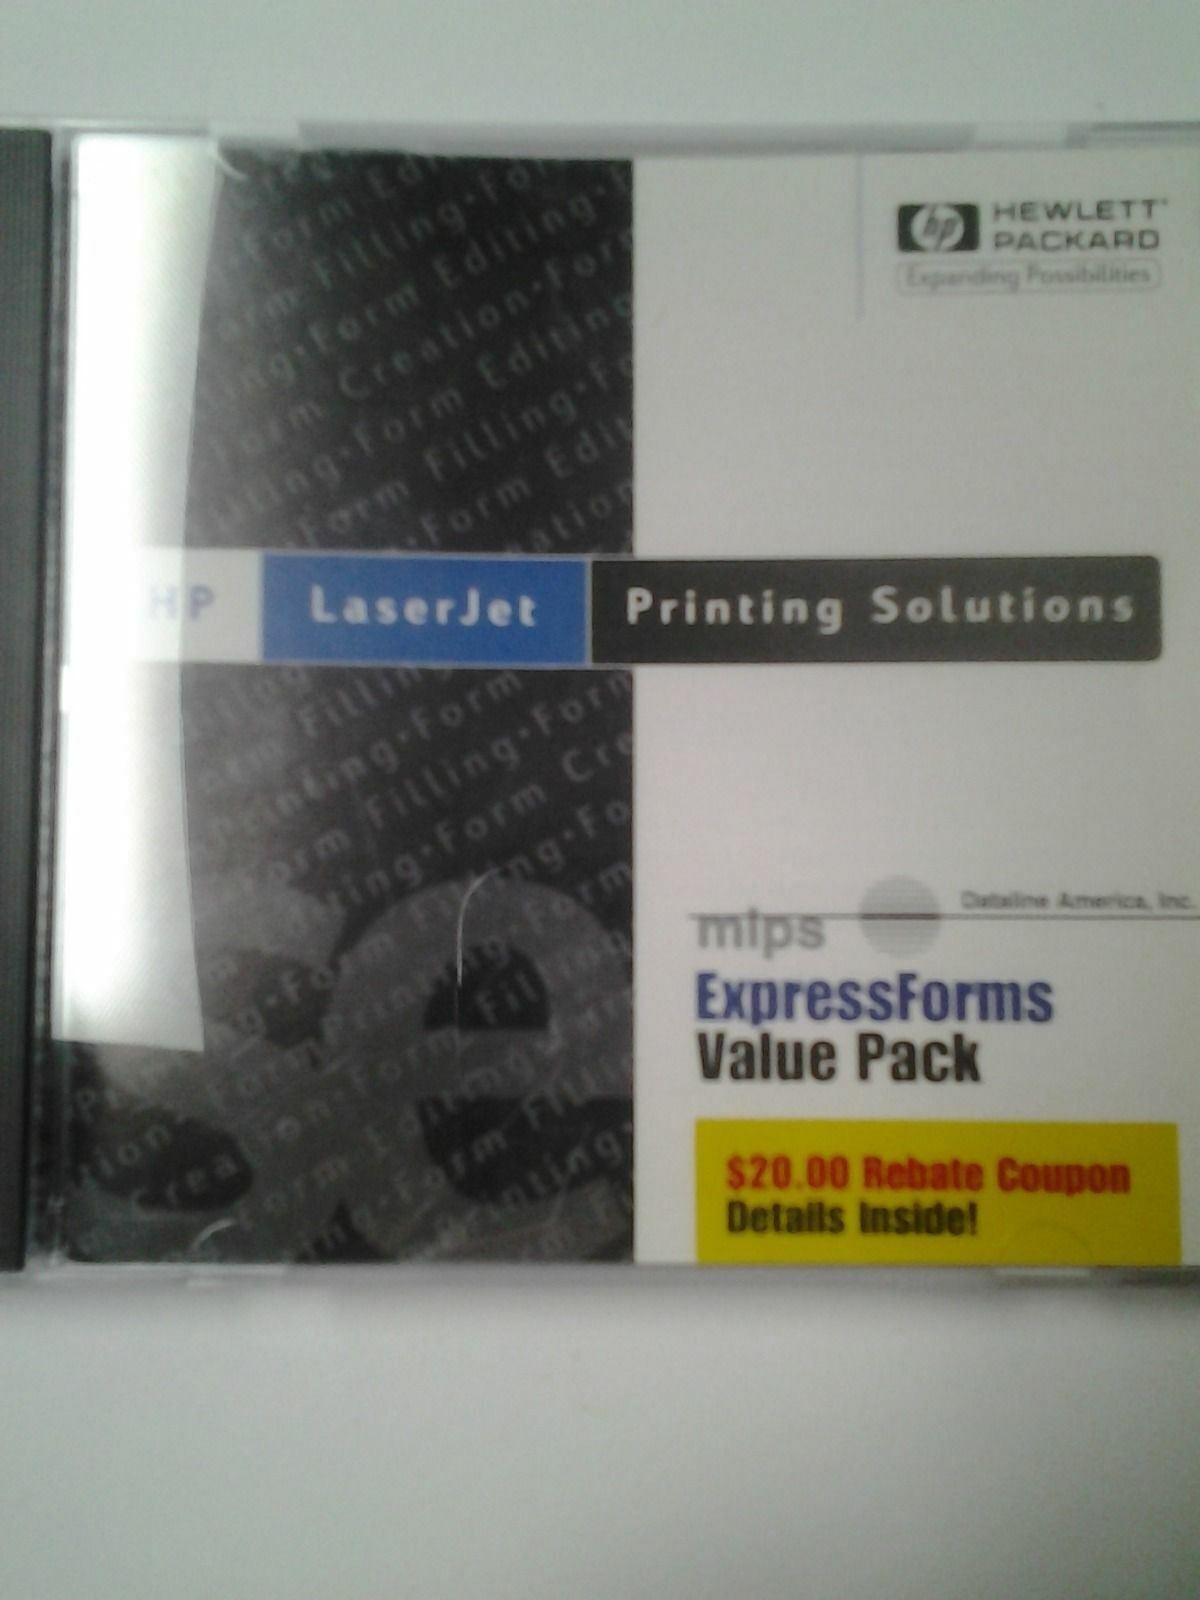 Mips ExpressForms for HP LaserJet Printers Software CD